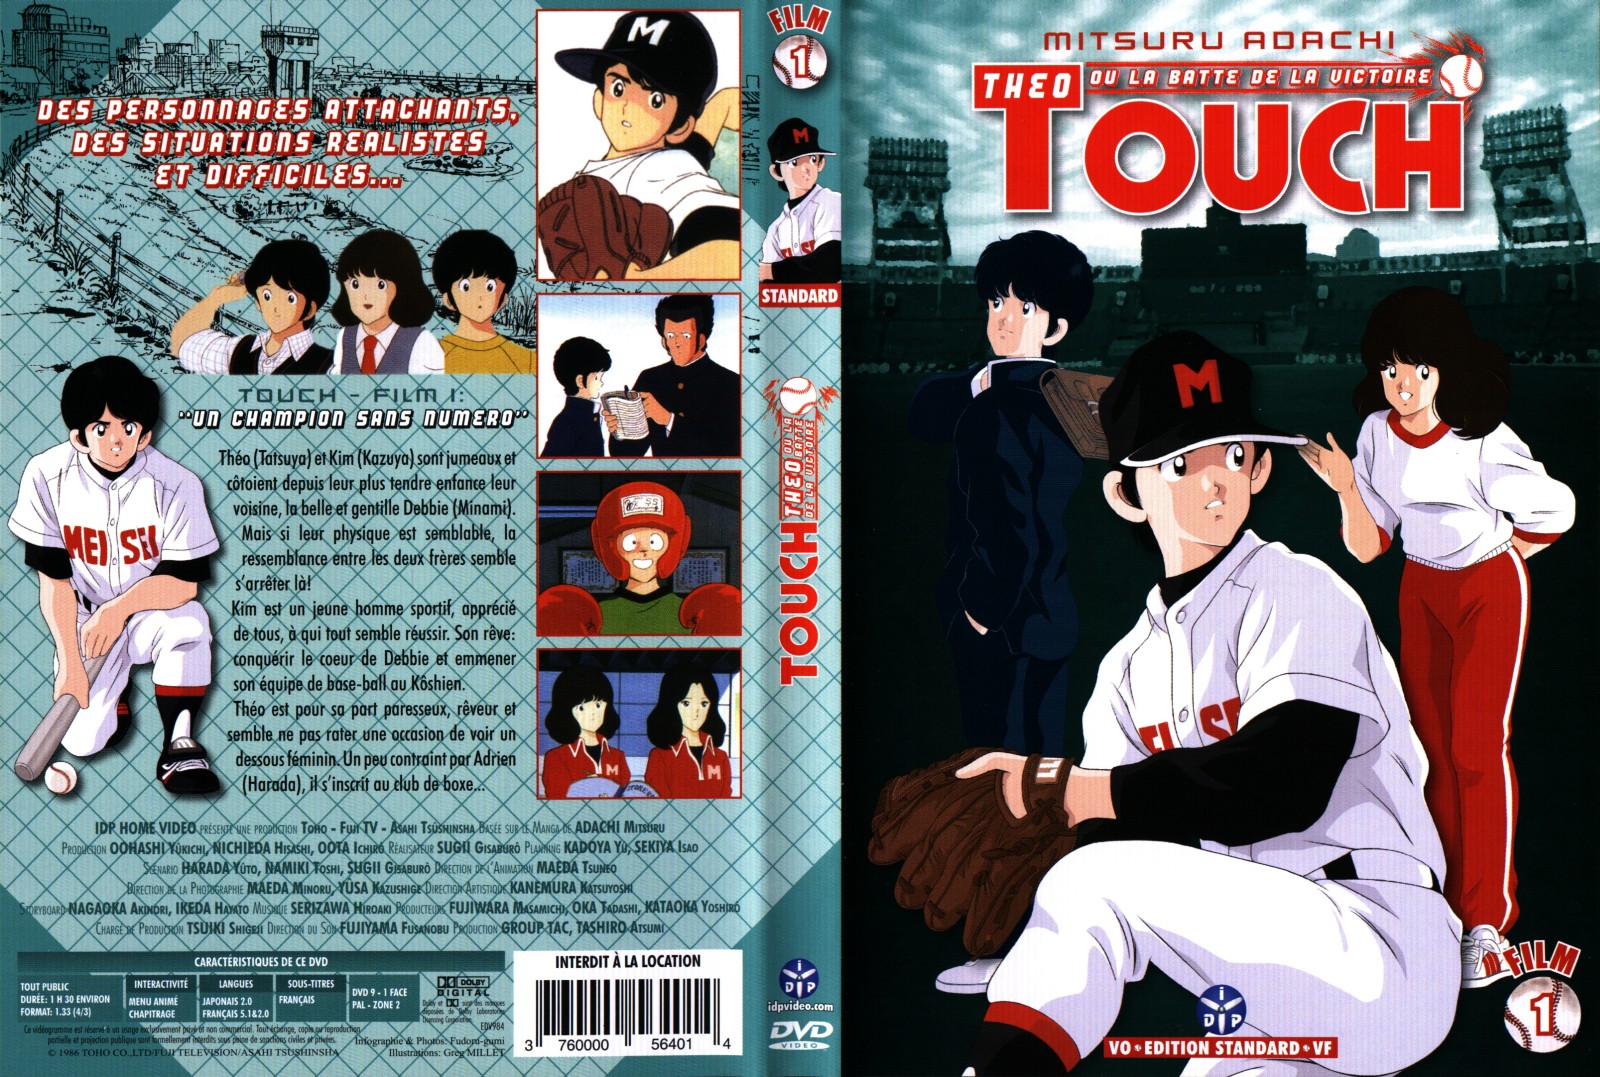 Jaquette DVD Touch film 1